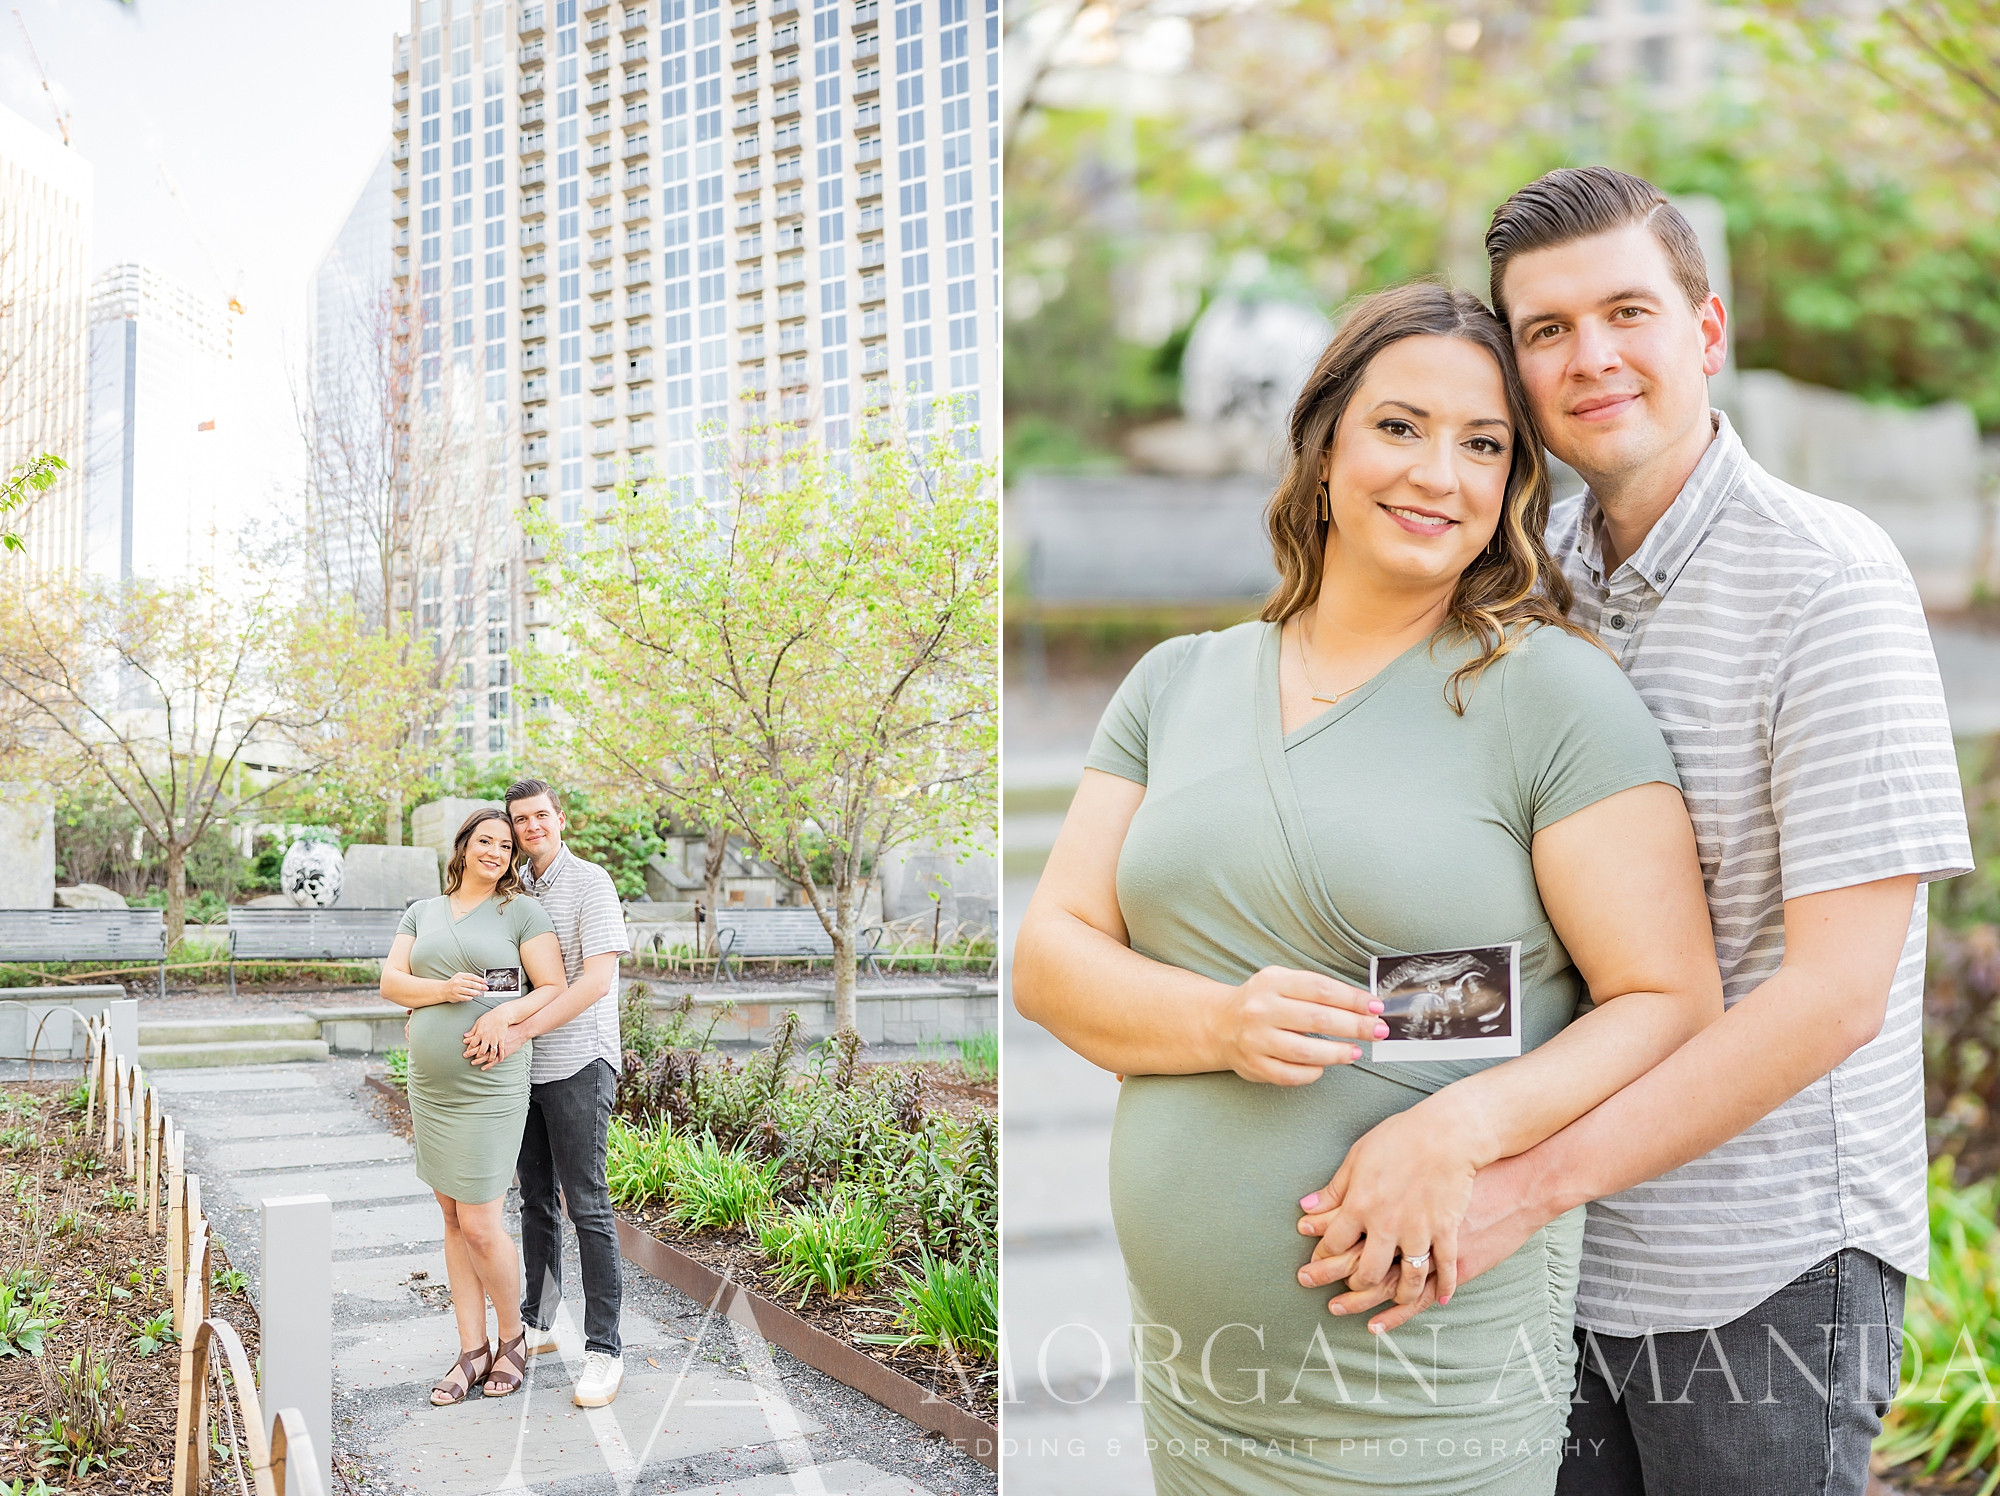 expecting parents hold baby bump and sonogram